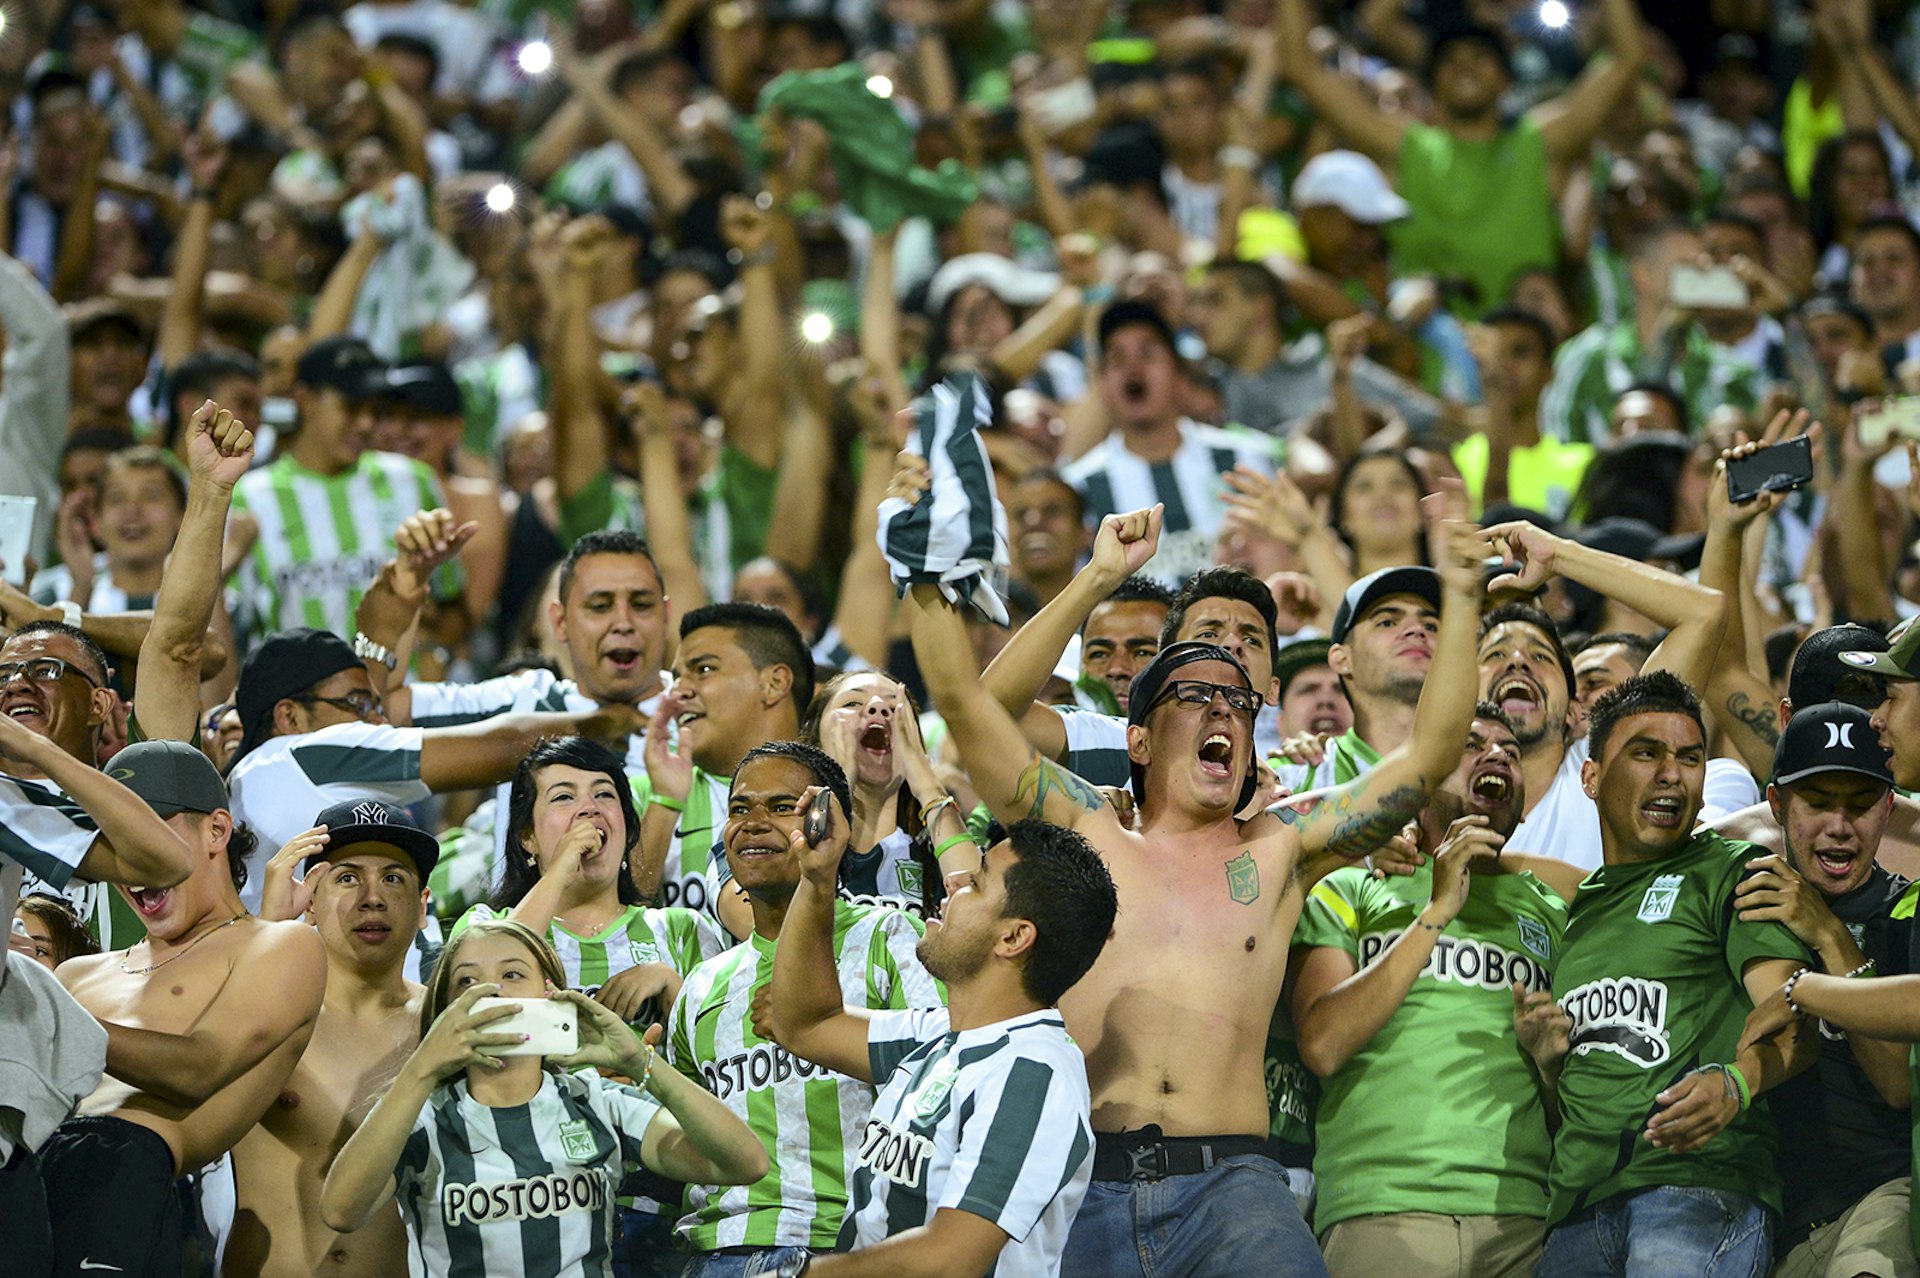 Legions of fans in green and white cheer on their team in Medellín, Colombia.